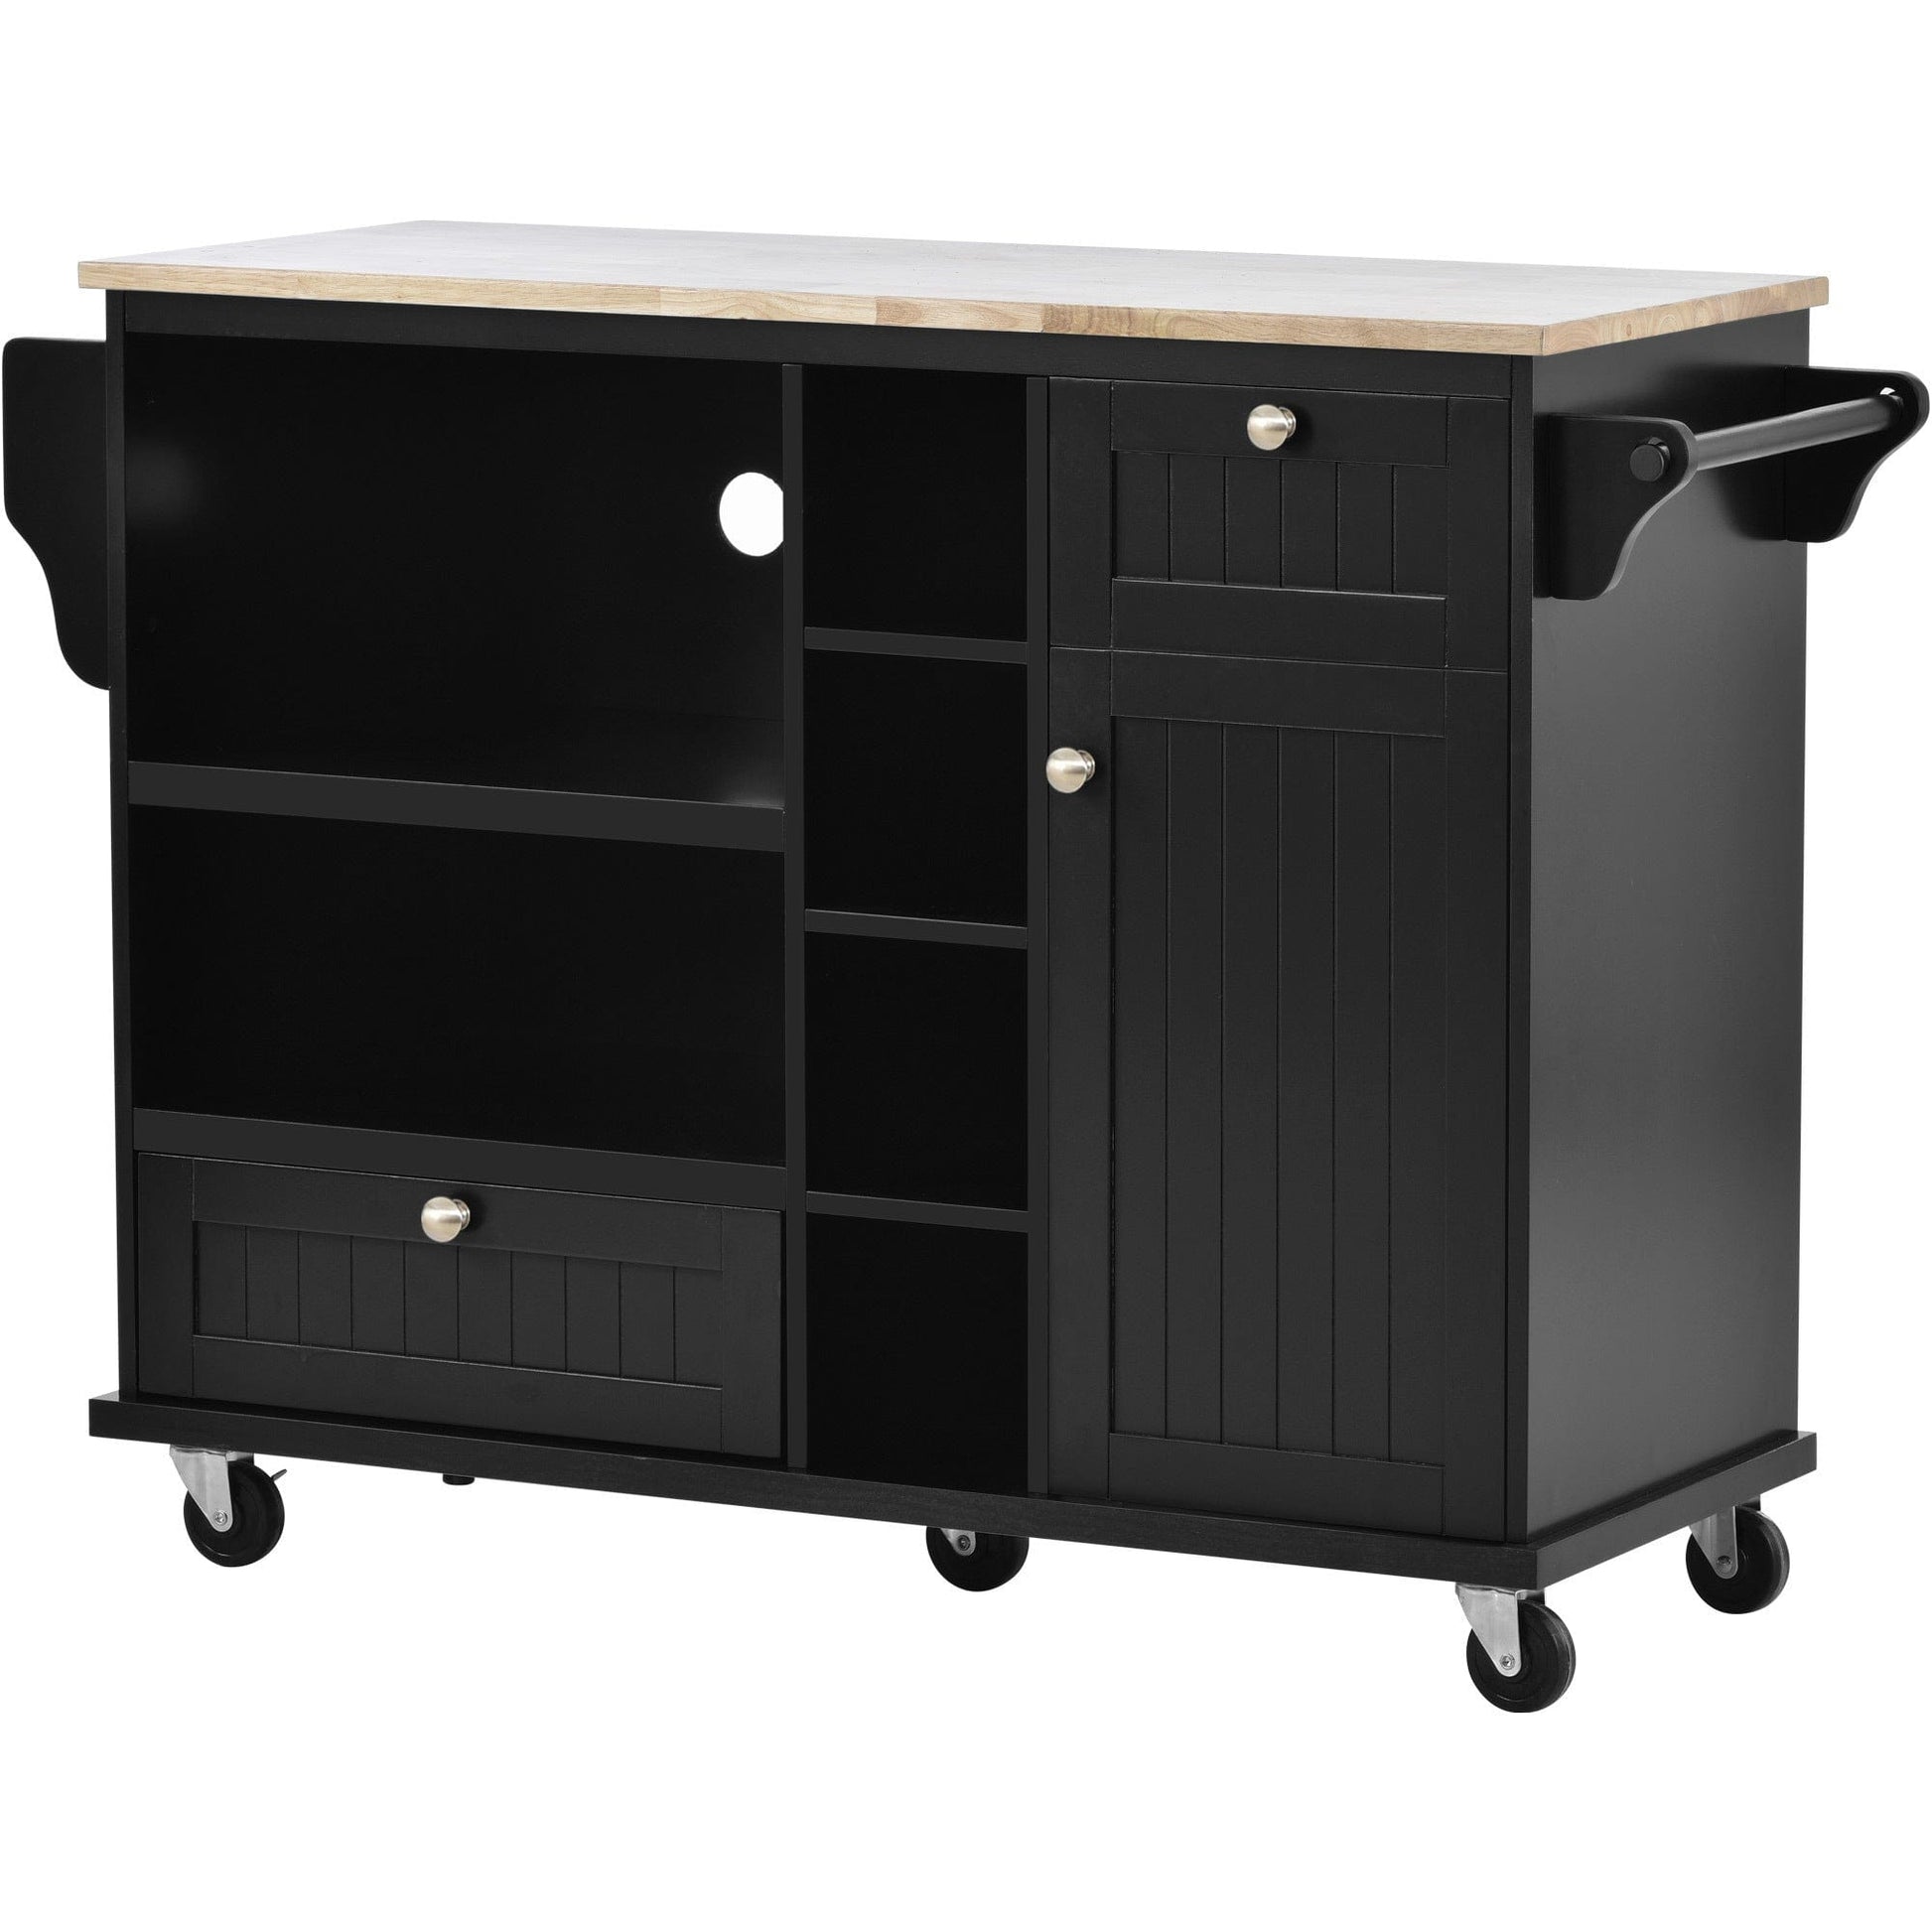 1st Choice Furniture Direct Kitchen Island Cart 1st Choice Premium Quality Island Cart with Storage Cabinet in Black